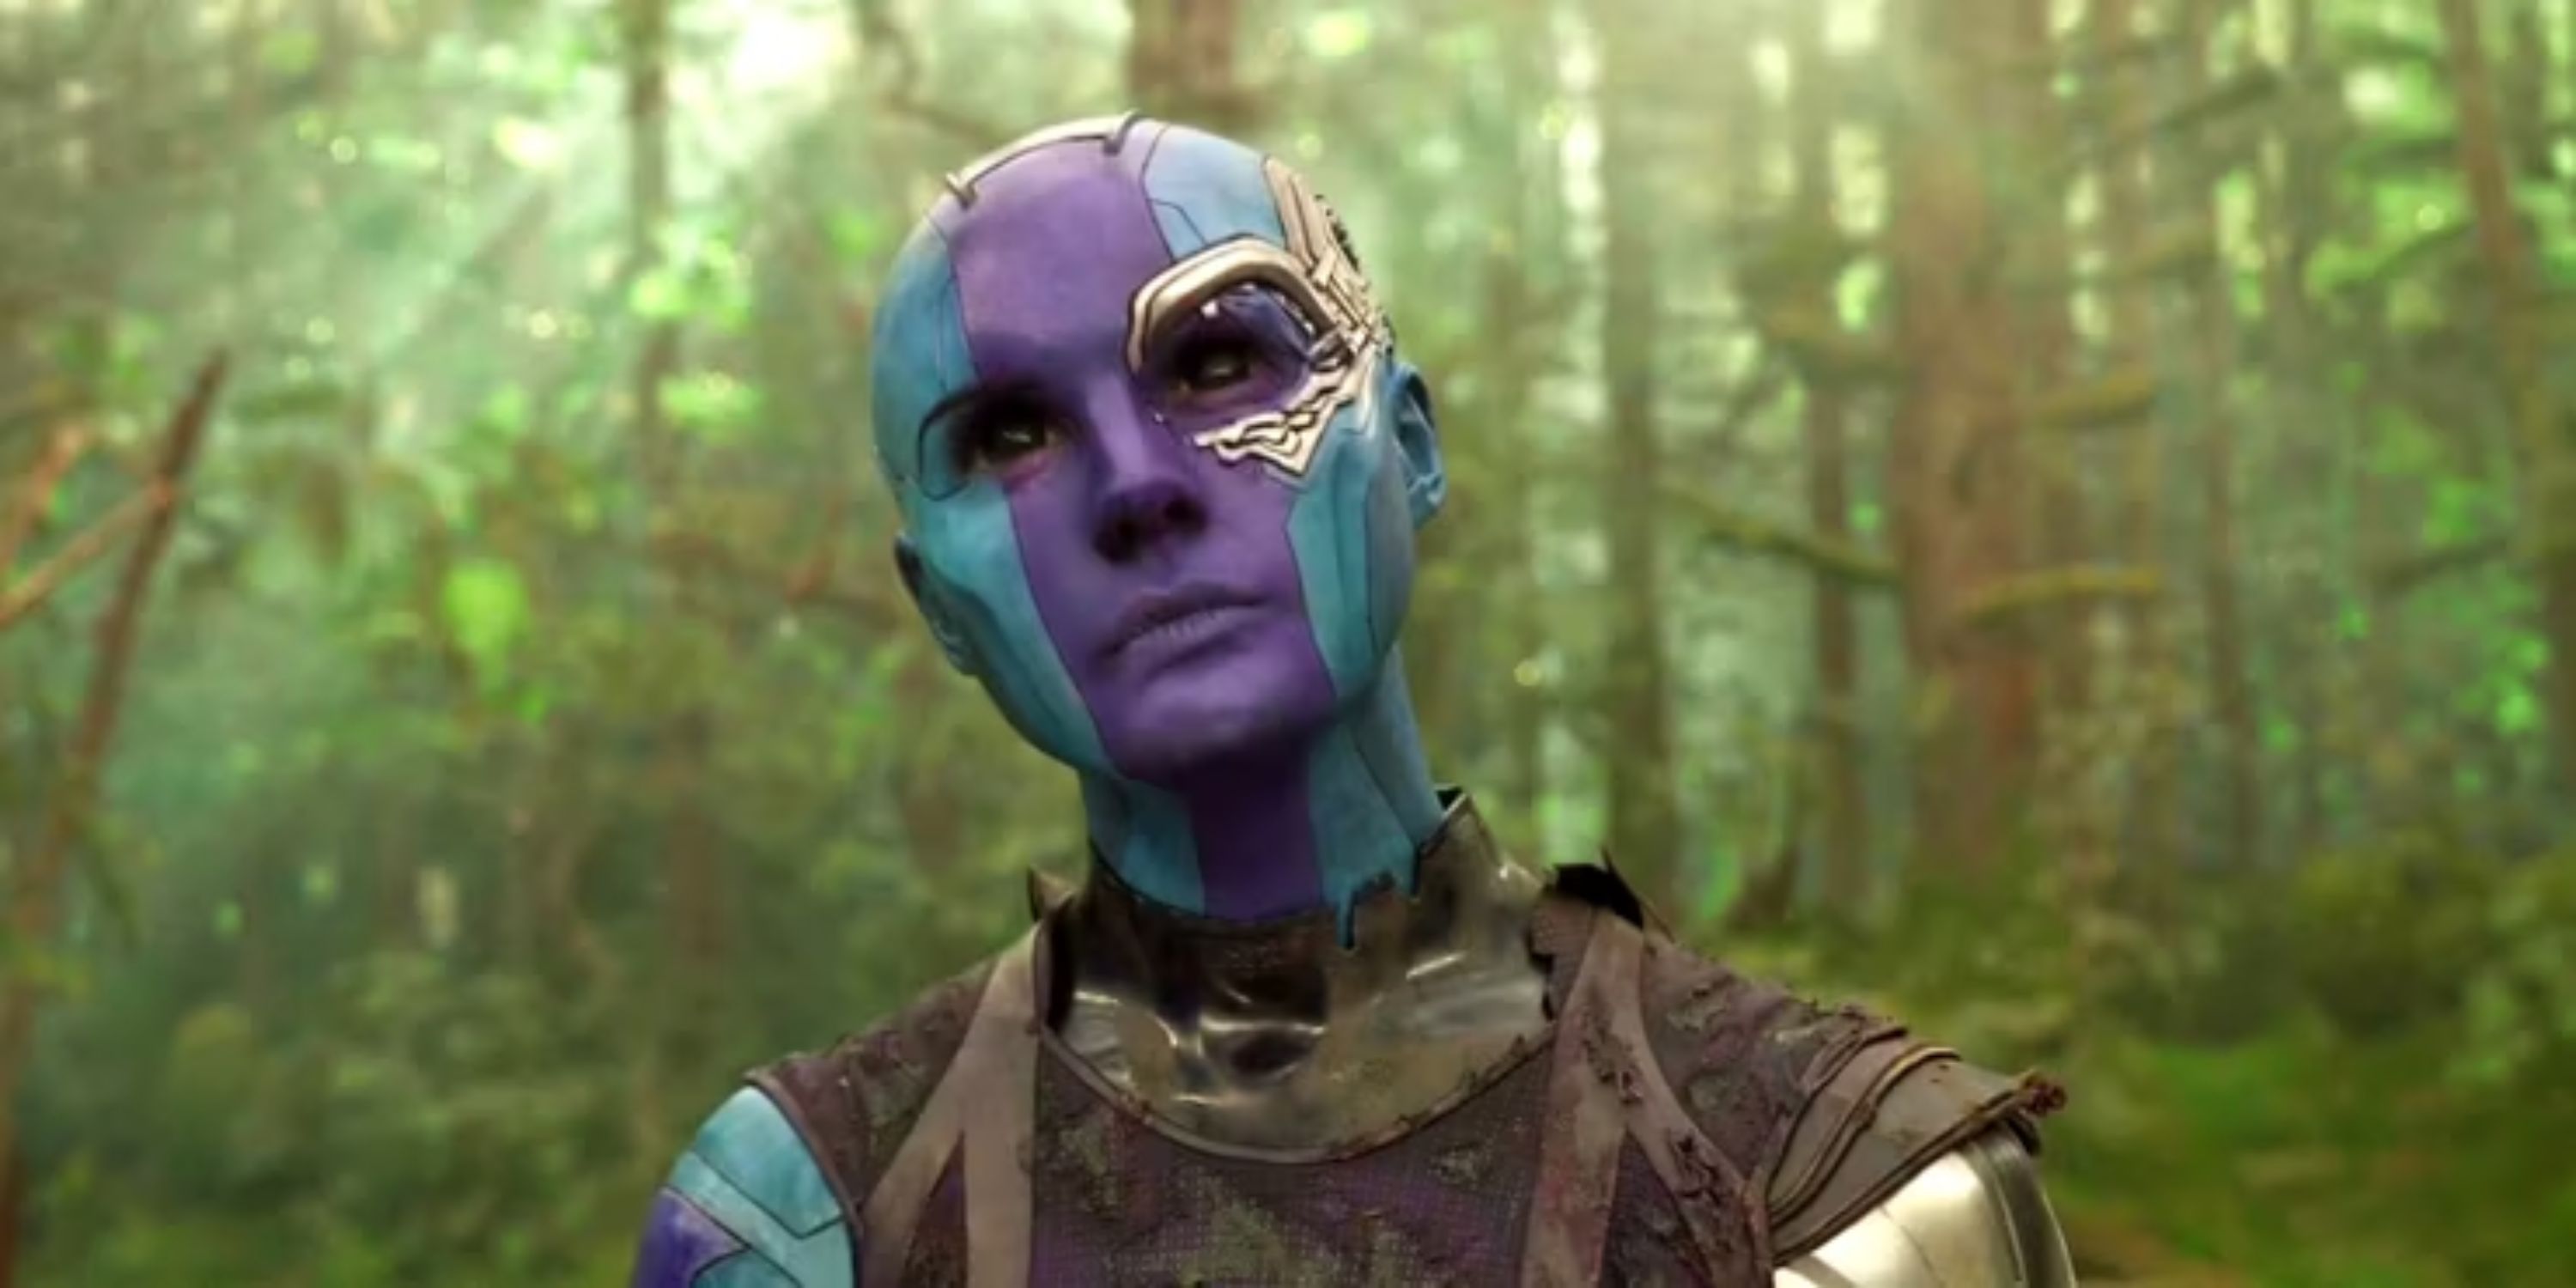 Nebula in the forest with Rocket and Groot